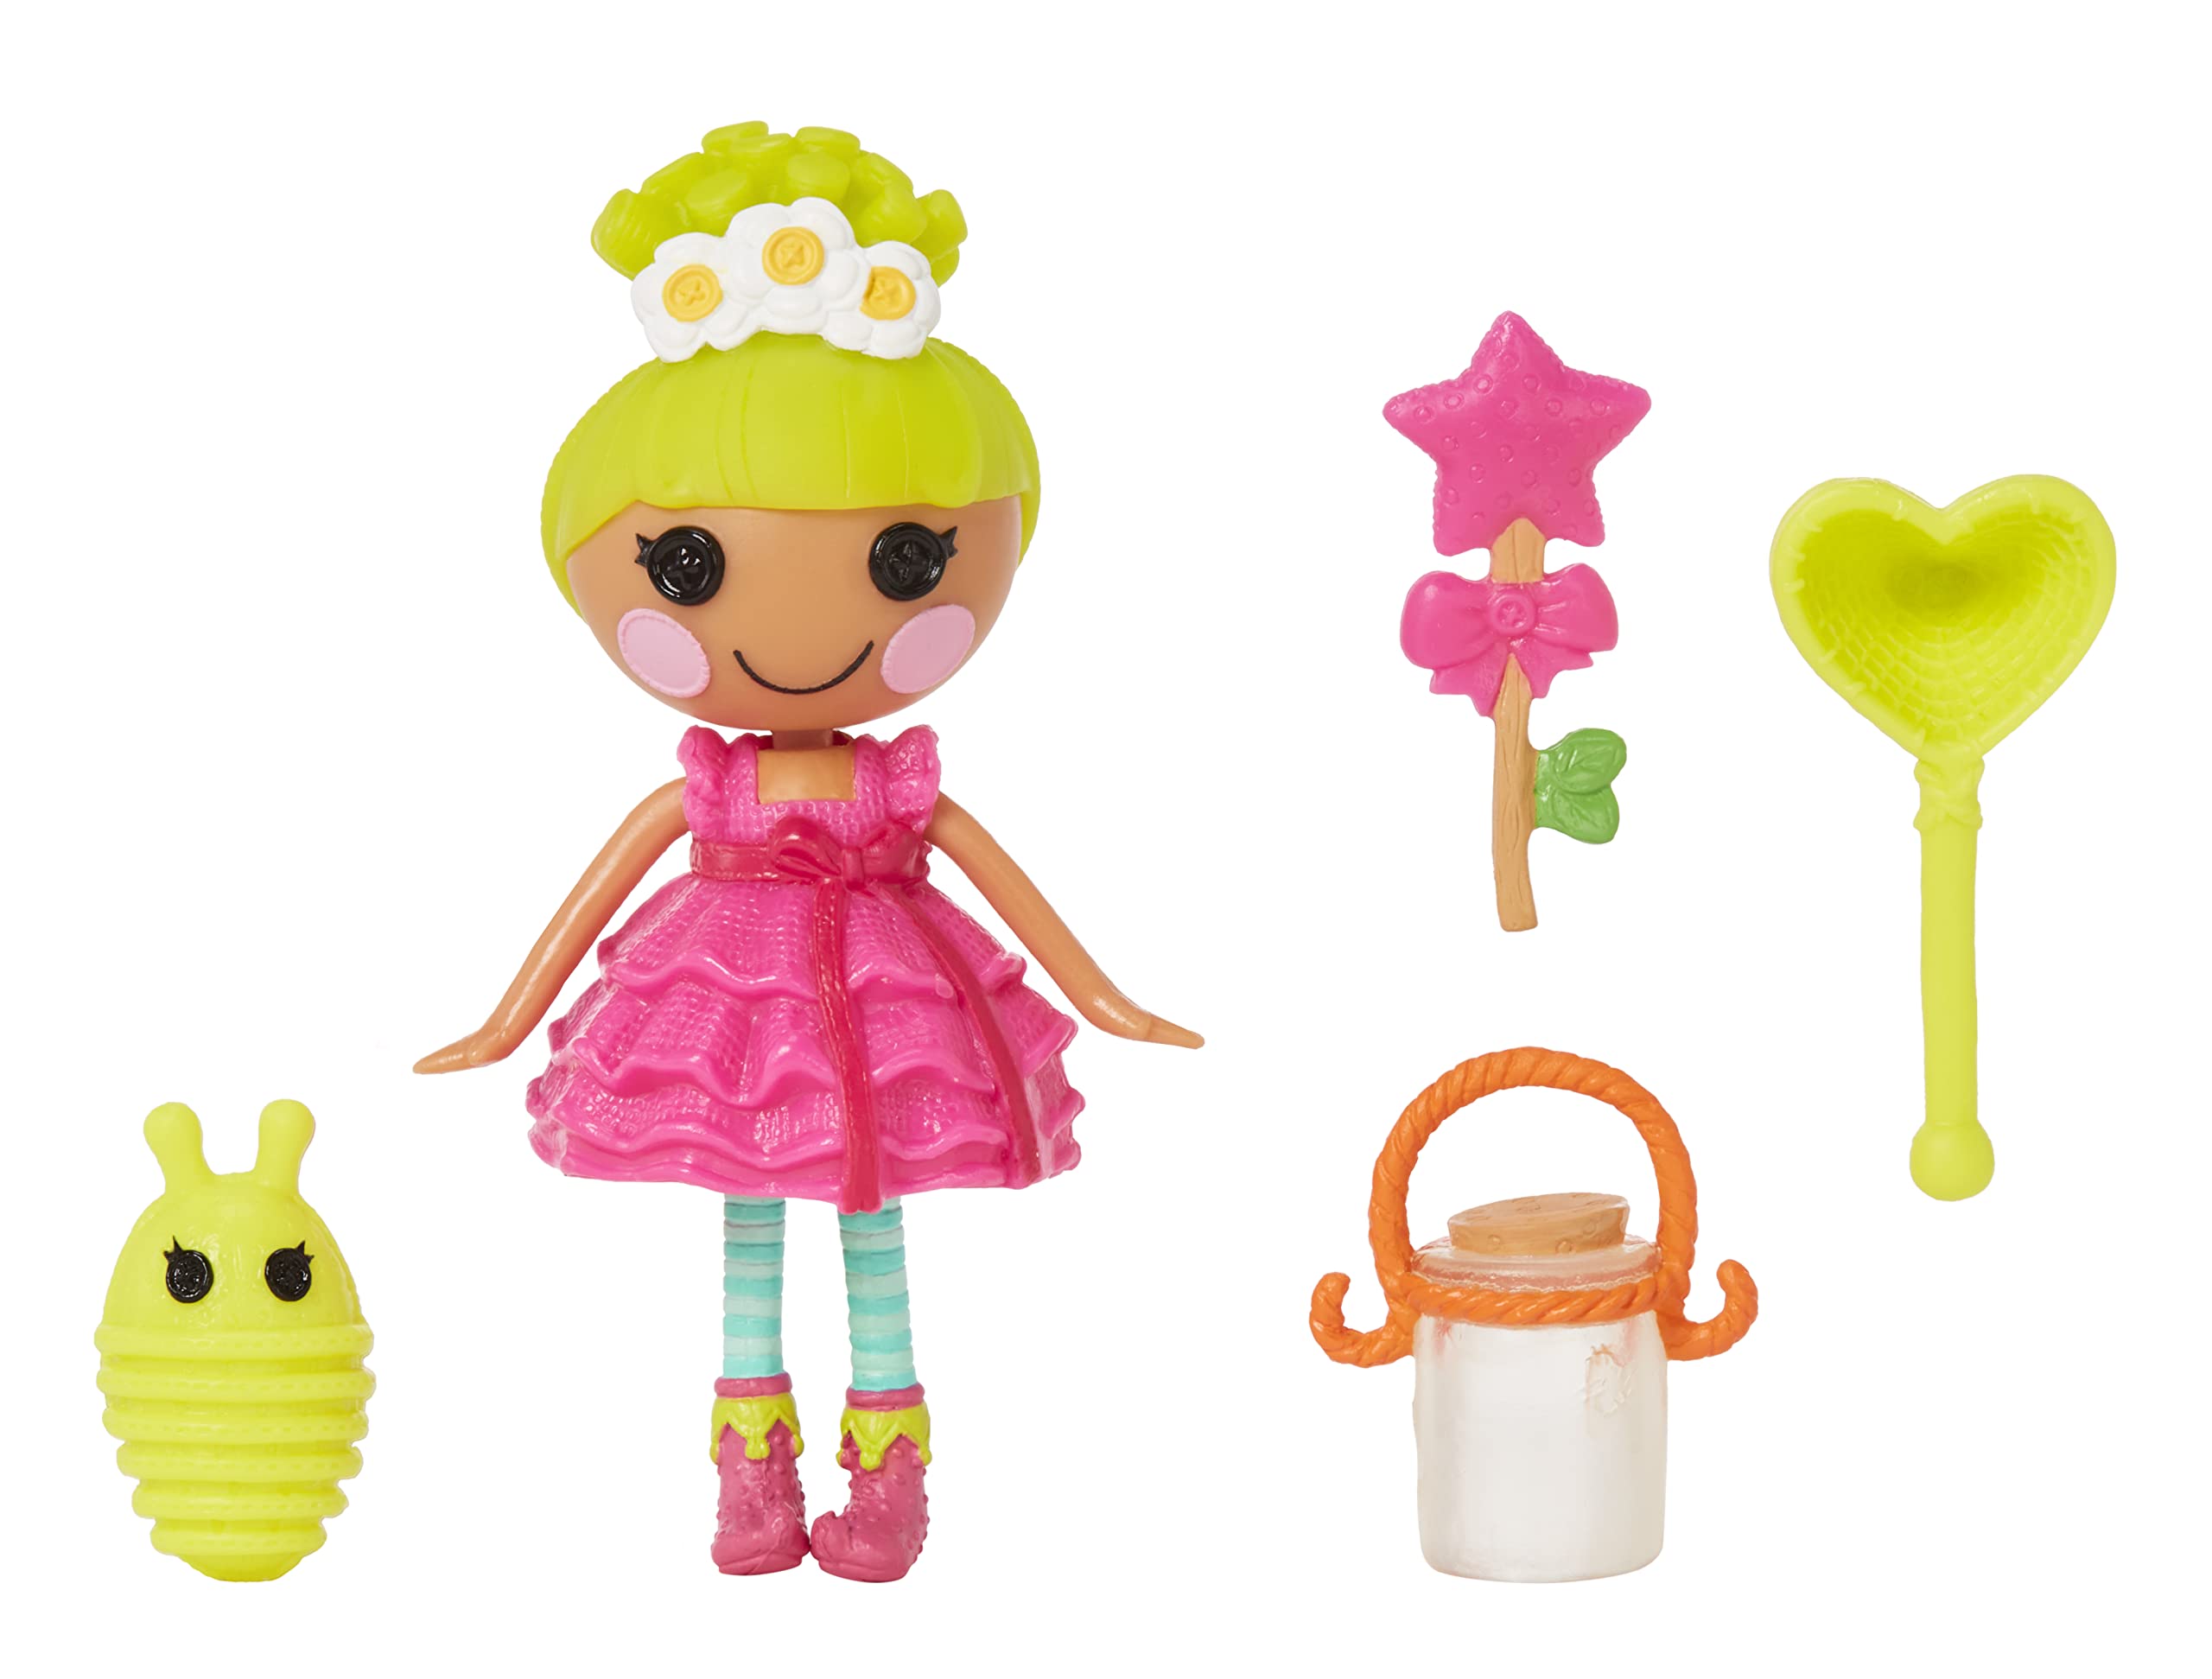 Lalaloopsy Mini TM Doll 2-Pack – Jewel Sparkles + Pix E. Flutters with Mini Pets Persian Cat & Firefly, Two 3” Mini Dolls with Accessories, in Reusable House Package playset, for Ages 3-103